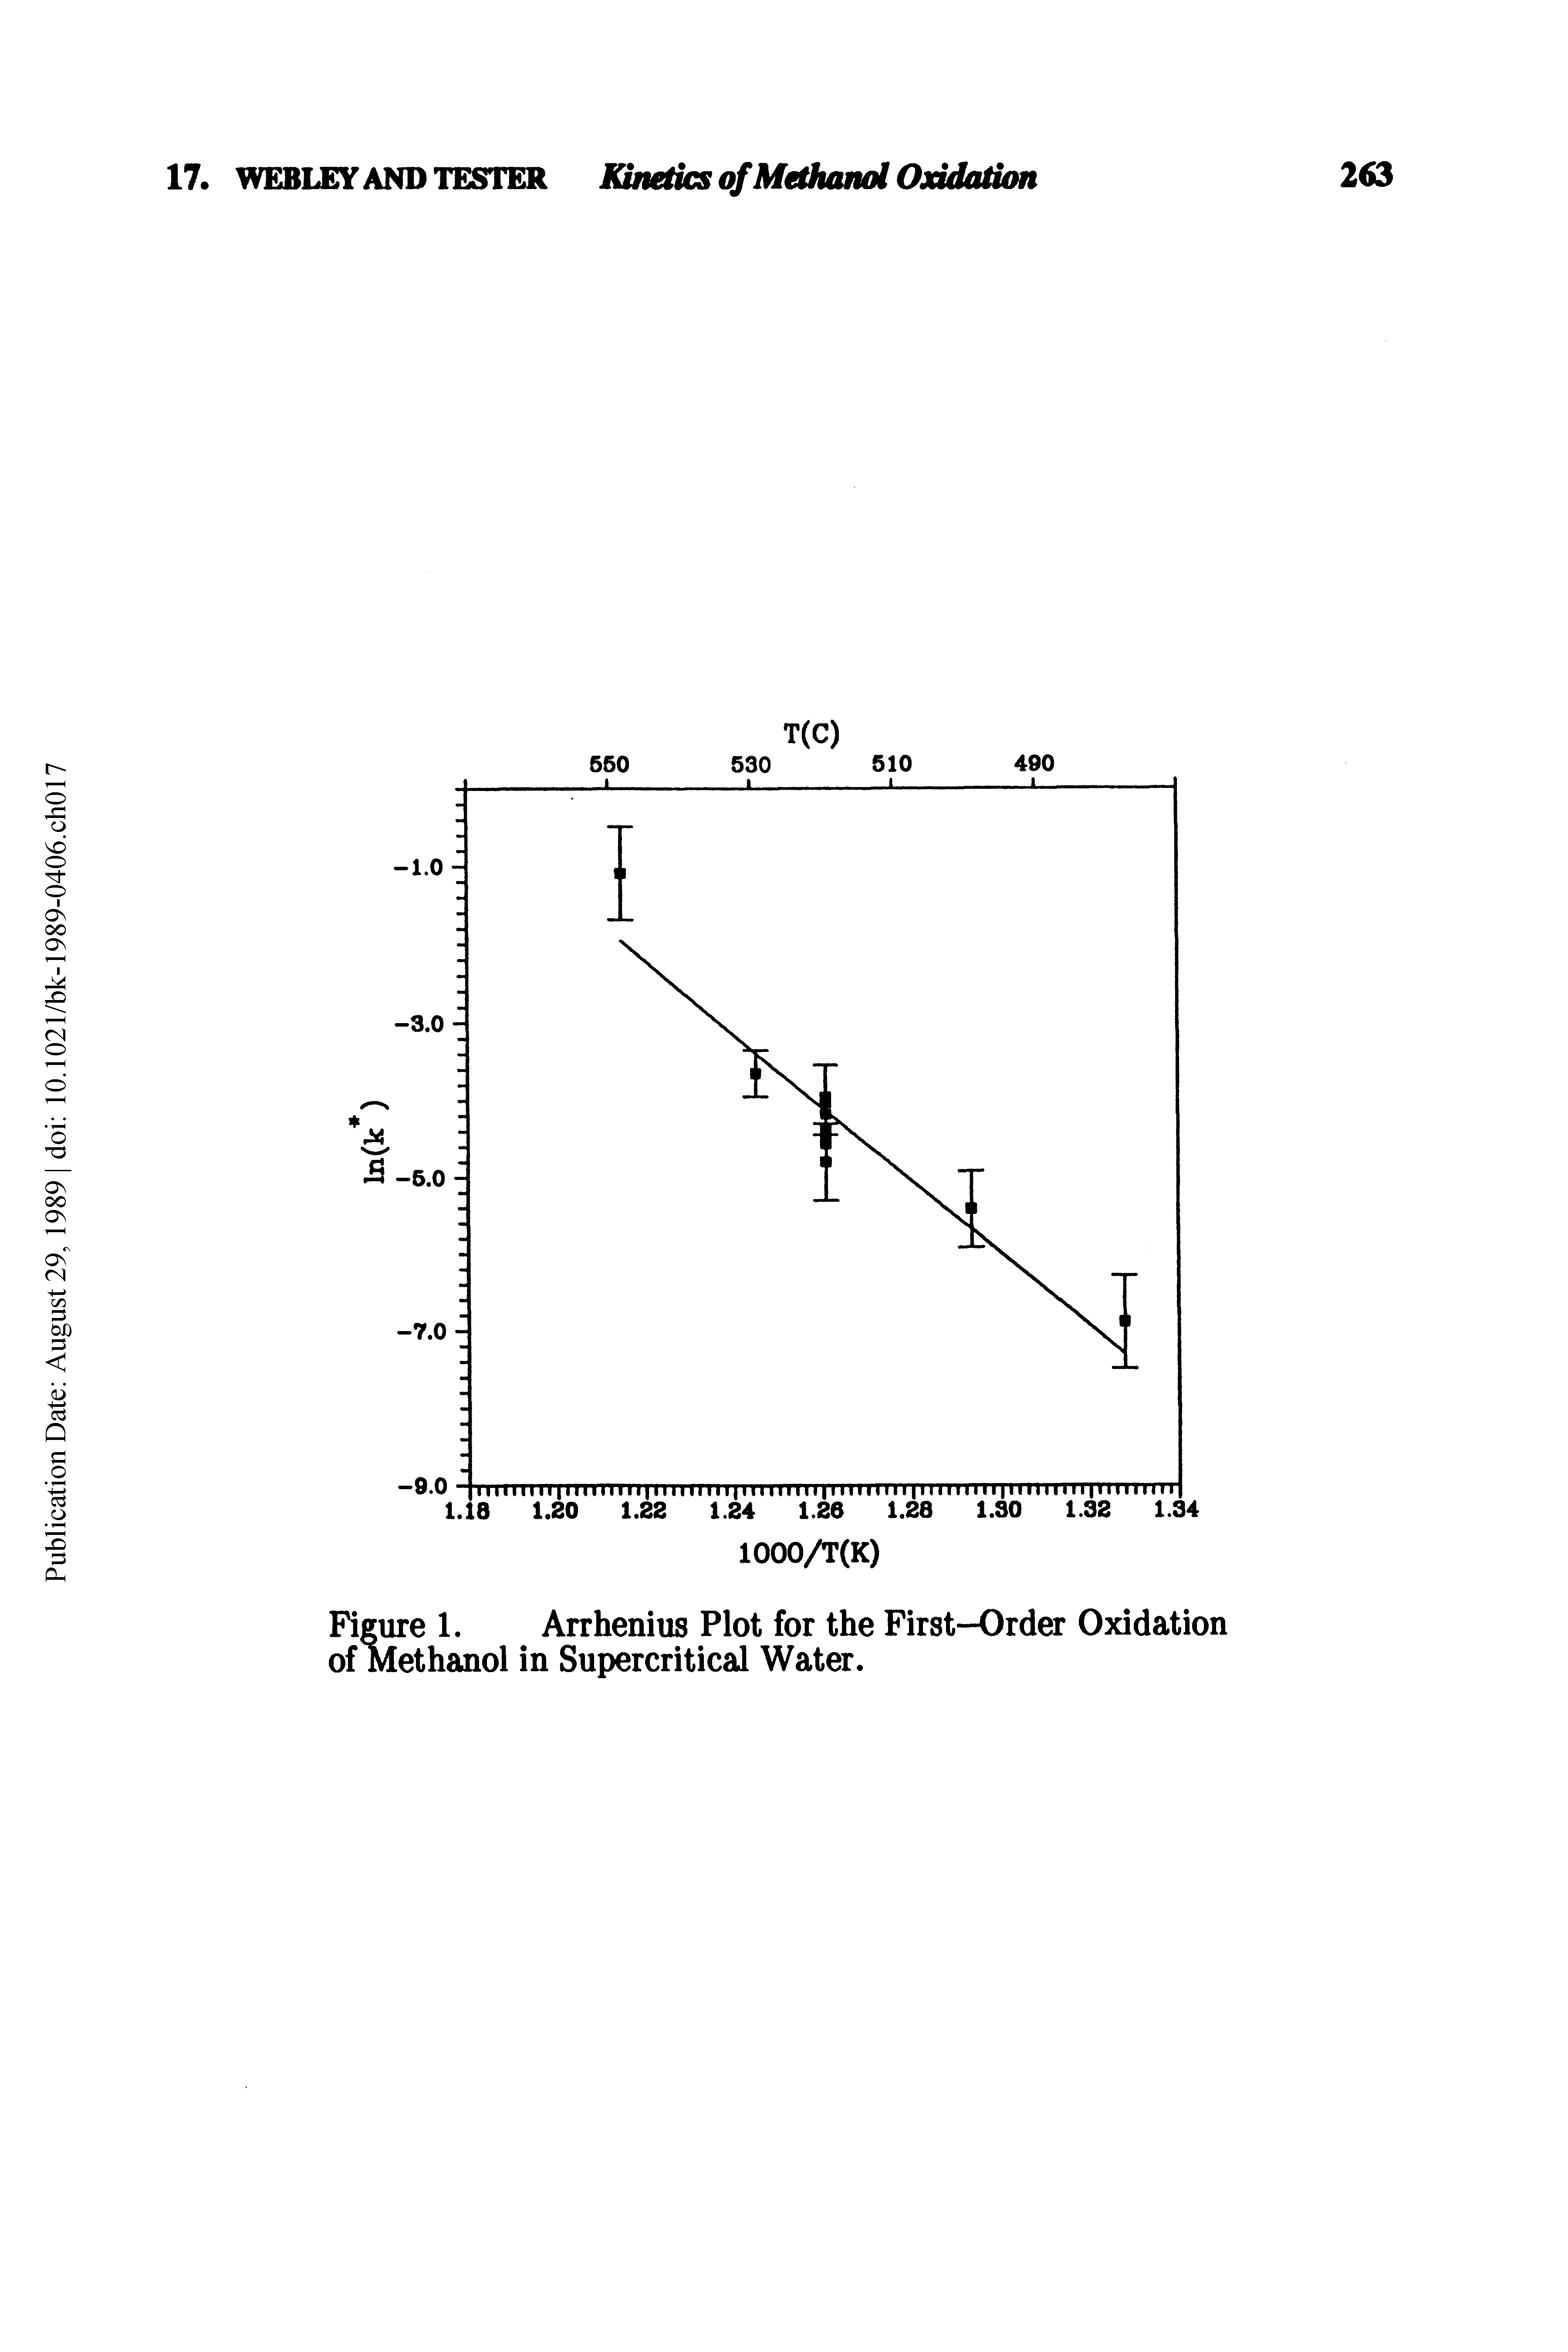 Figure 1. Arrhenius Plot for the First-Order Oxidation of Methanol in Supercritical Water.